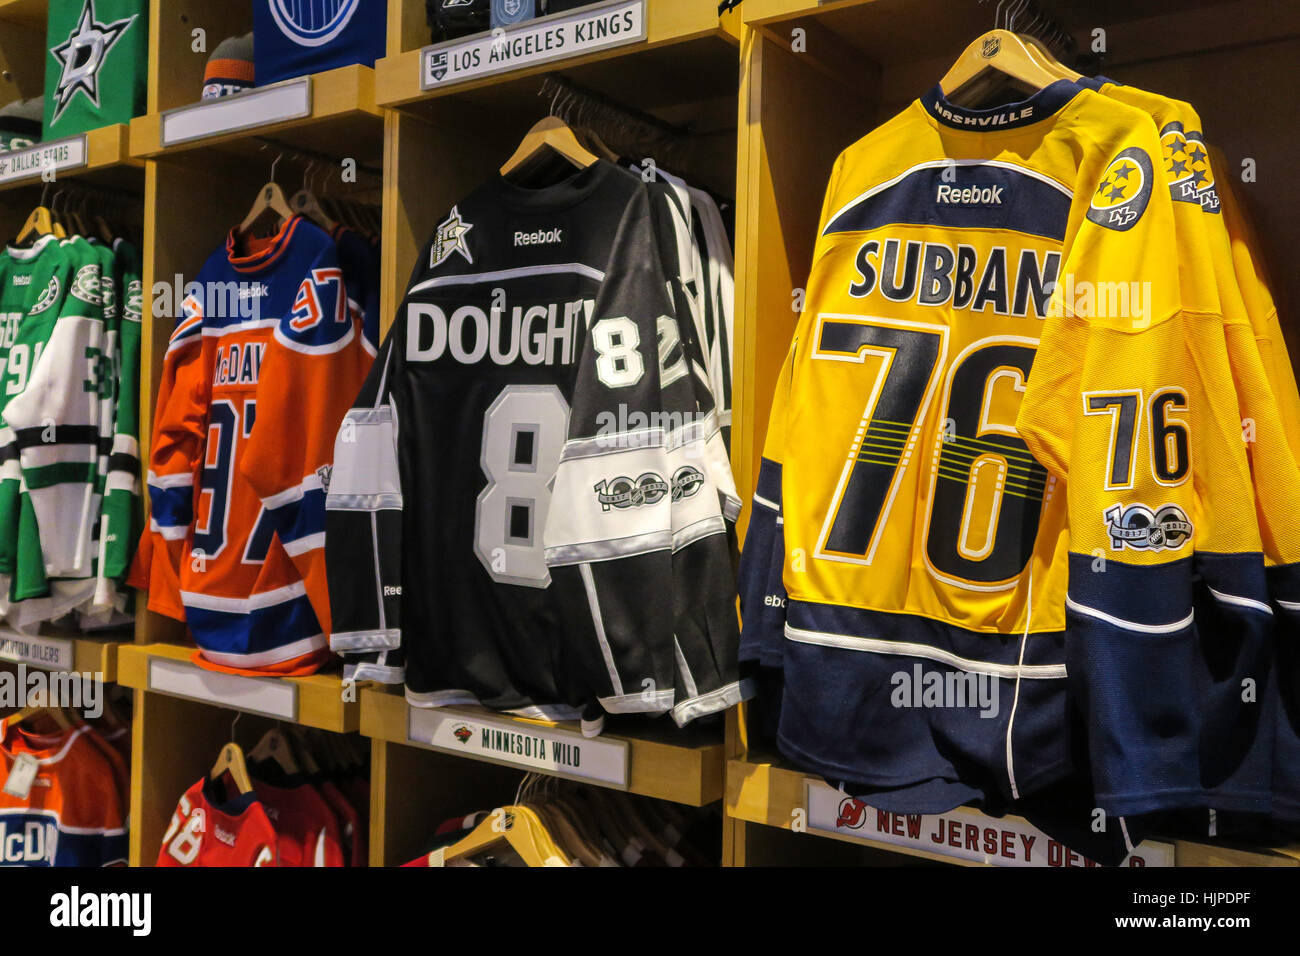 NHL Powered by Reebok Store, 1185 Avenue of the Americas, at the corner of  47th Street, NYC Stock Photo - Alamy